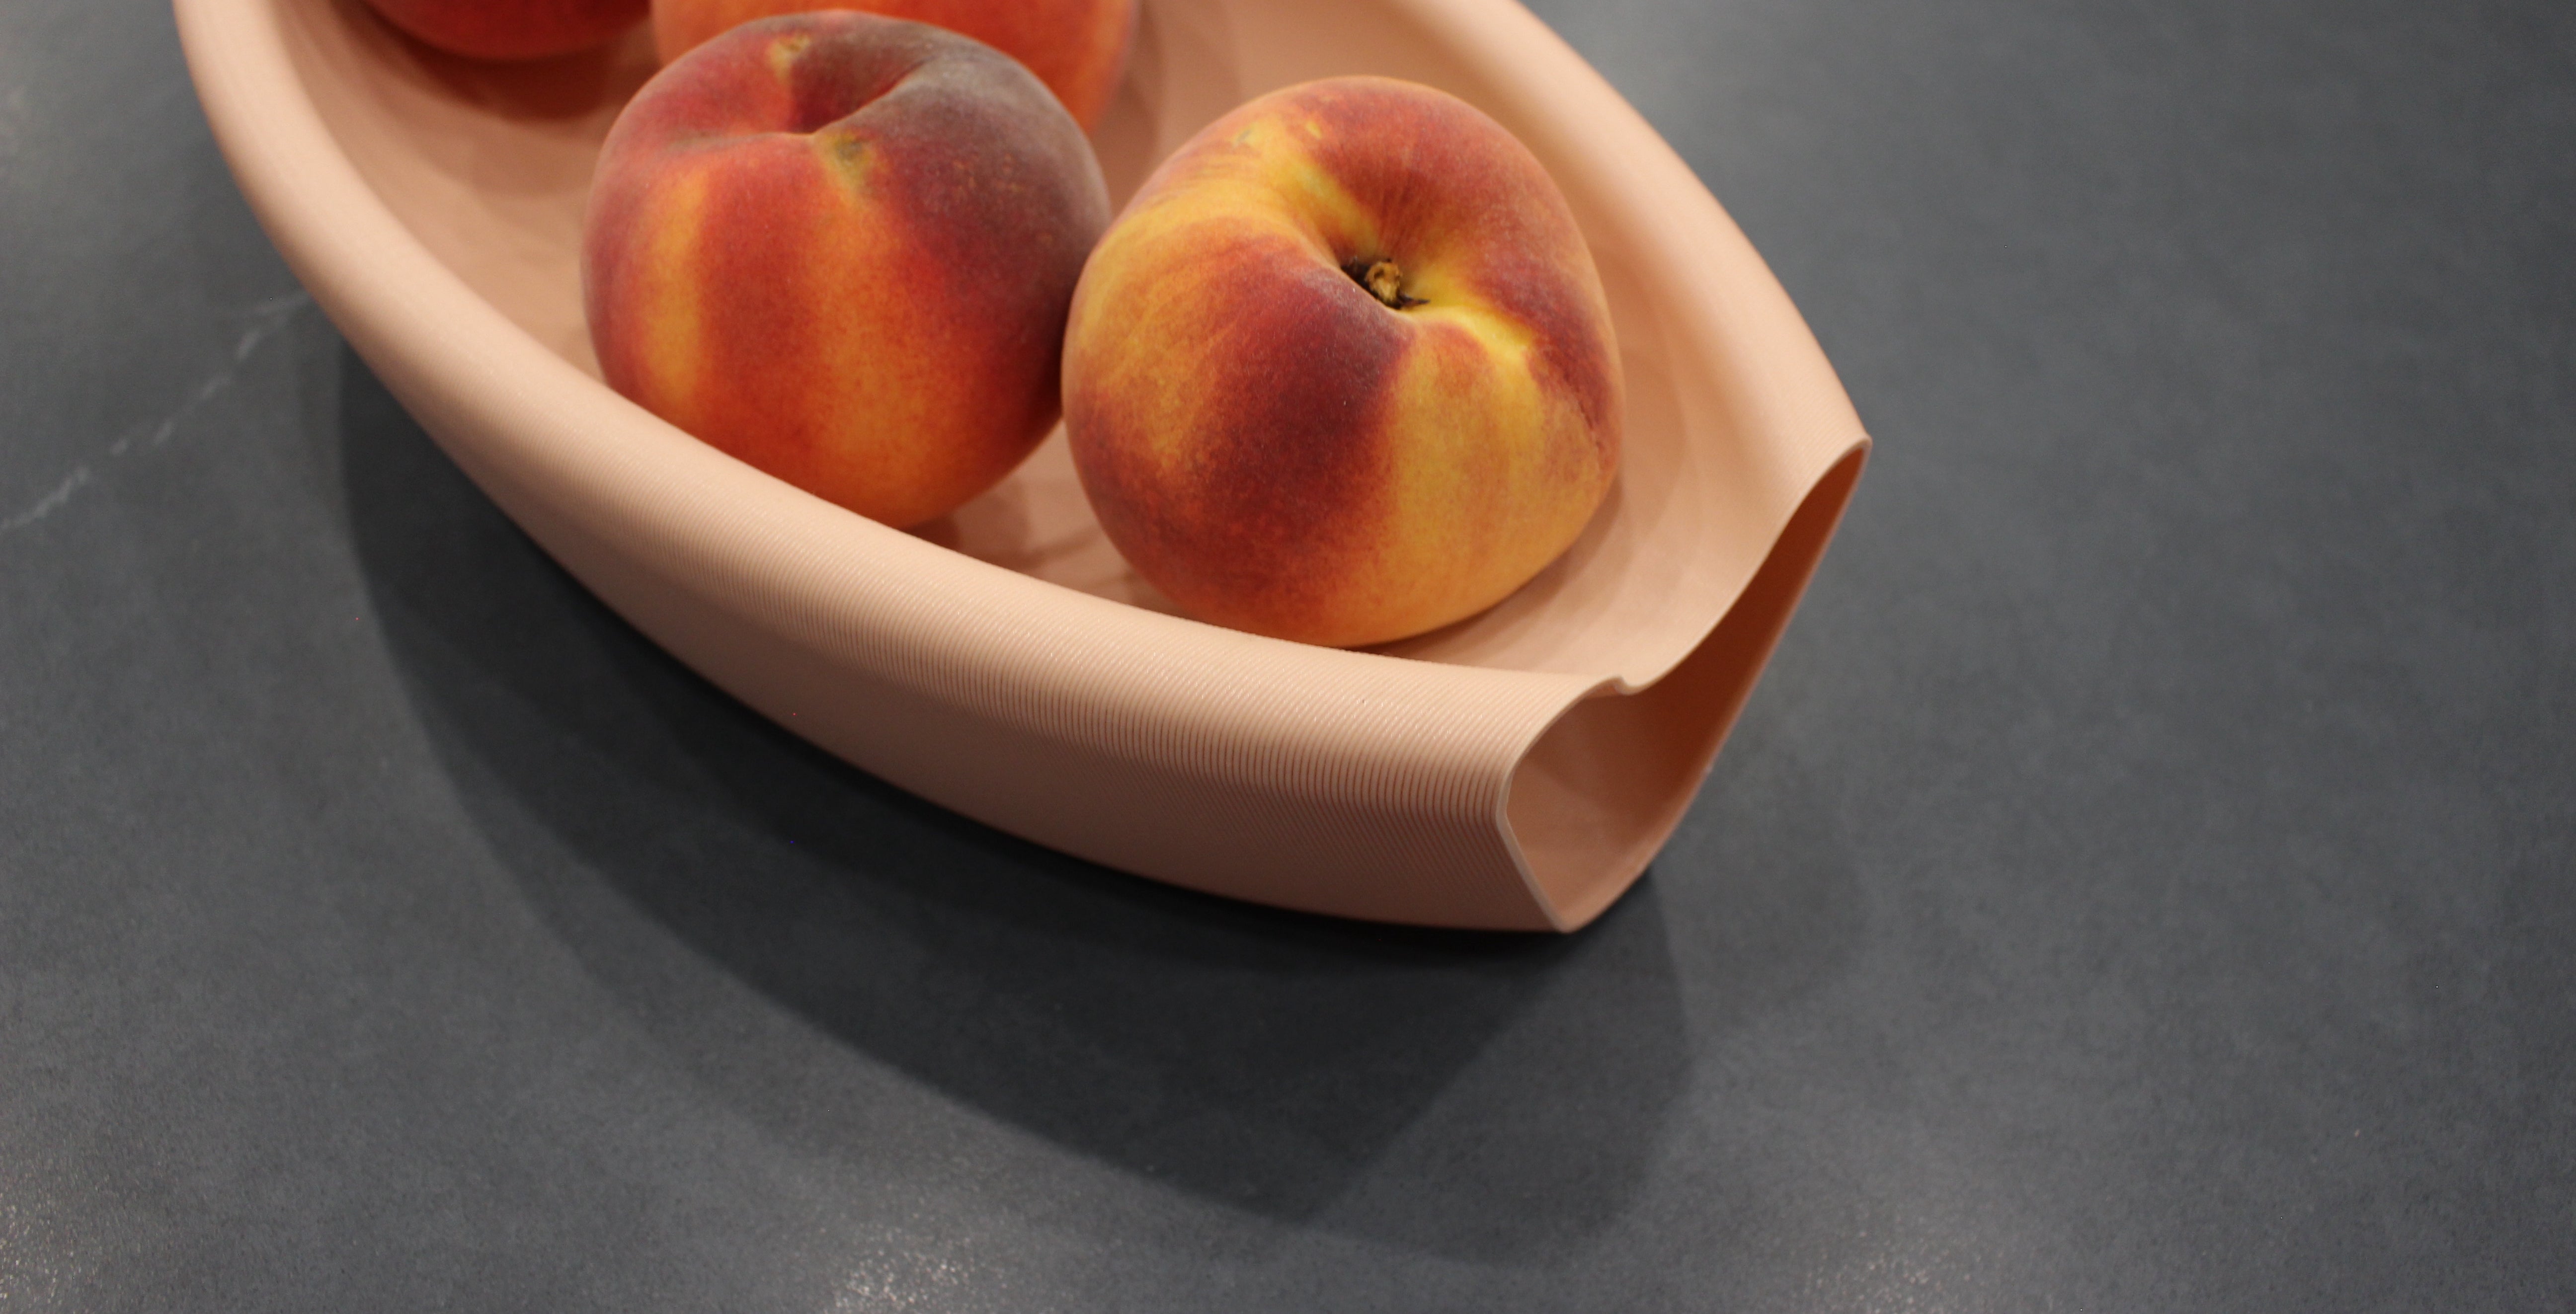 3D printed Aera bowl made with recycled plastic by Deme Design, pictured with peaches on a dark marble counter